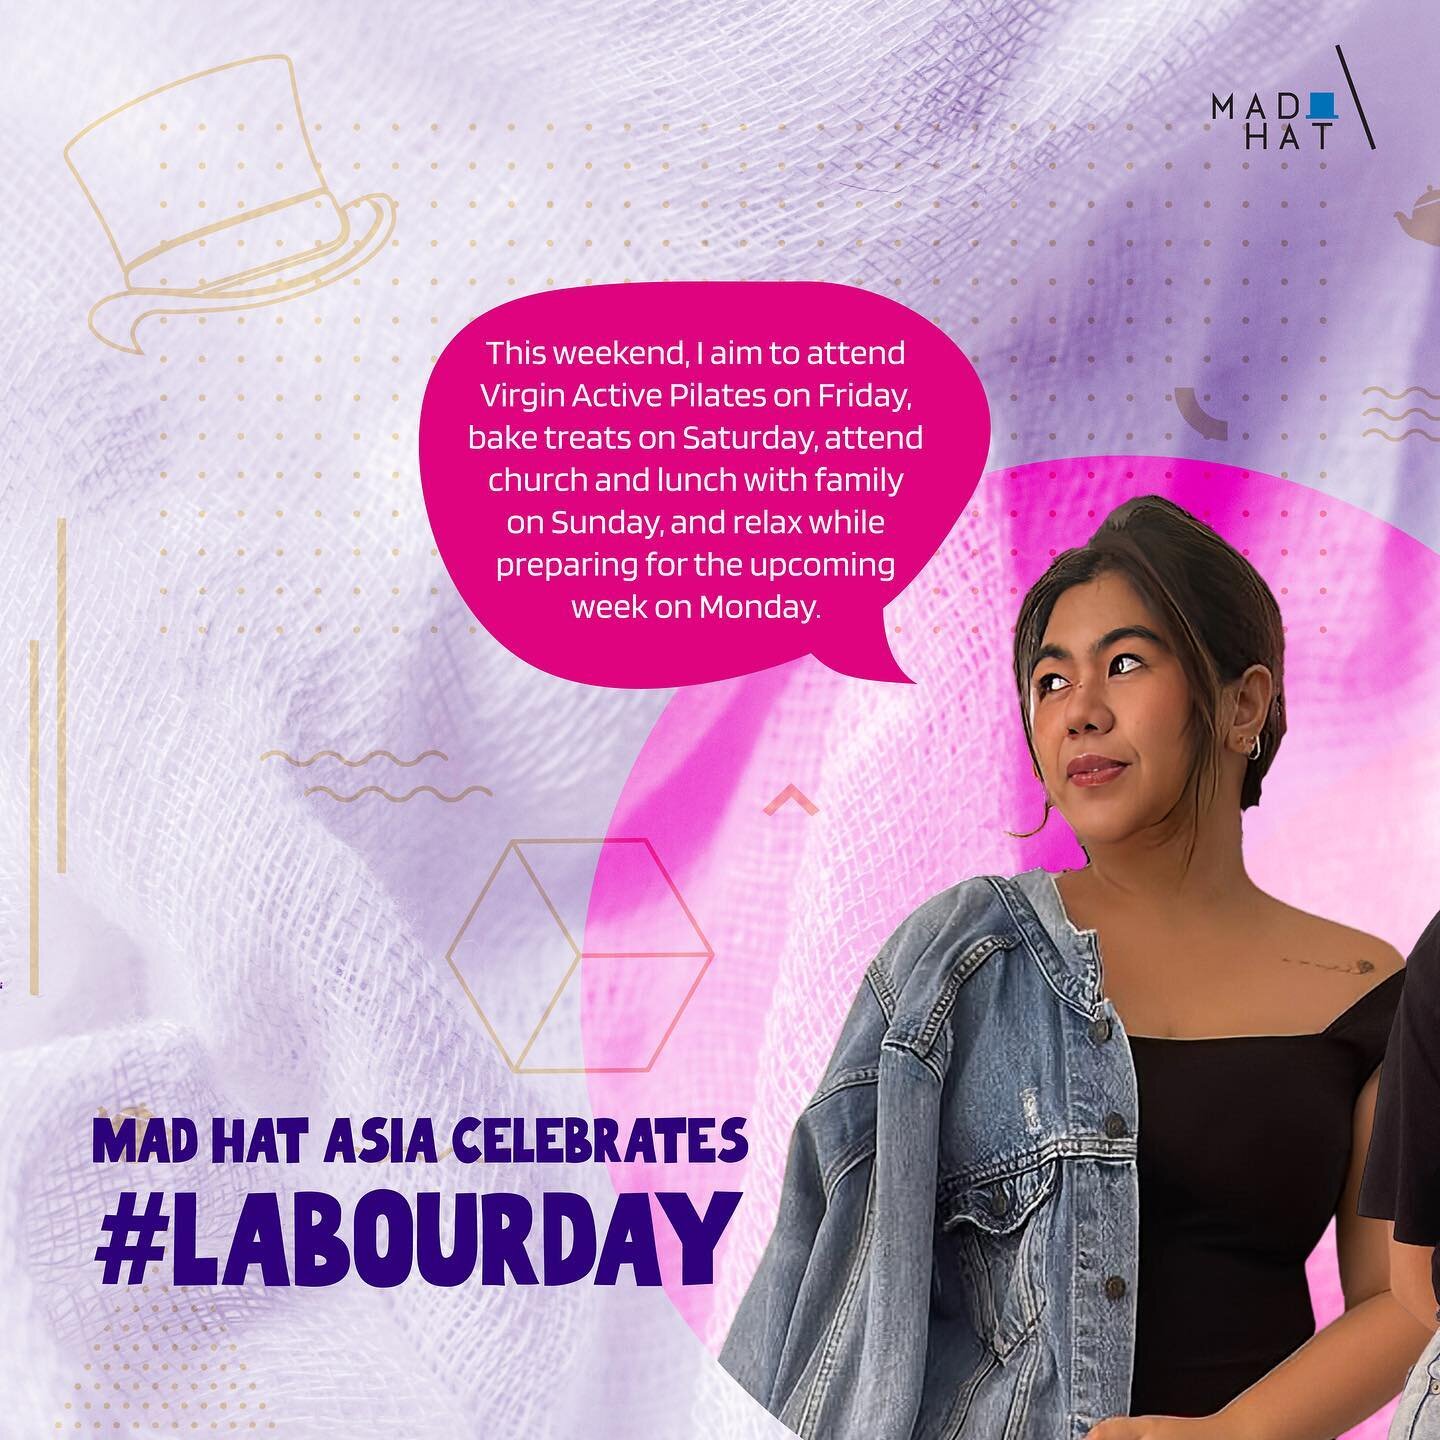 Here comes another long weekend for the Hatters who make the impossible to MAD possible. Happy Labour Day 🙌

But also....we asked them to spill the beans! Swipe to see what some of our Hatters are getting up to this long weekend. 😝
.
.
.
#MadHatAsi